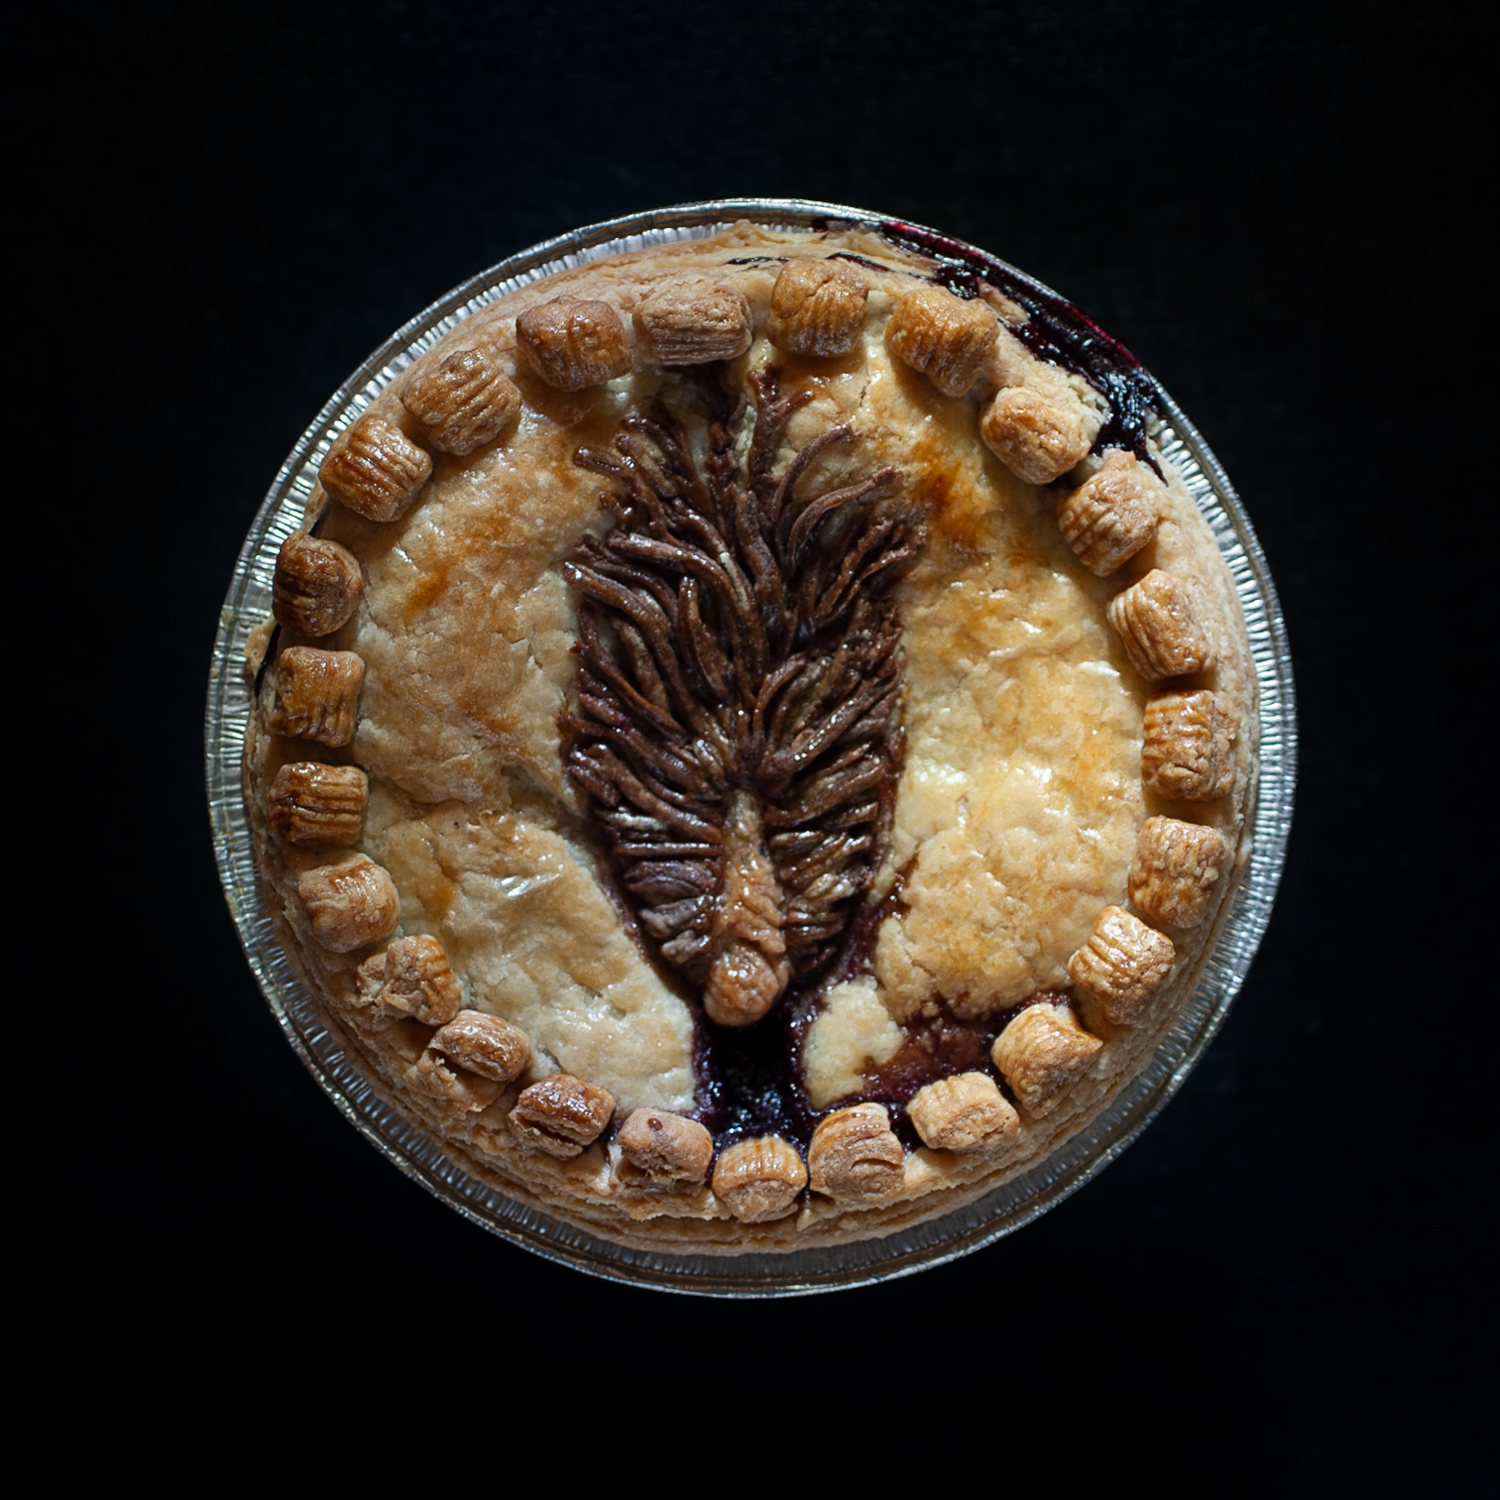 baked cherry berry berry pie with a pie crust art that looks like a realistic vulva with brown pubic hair.